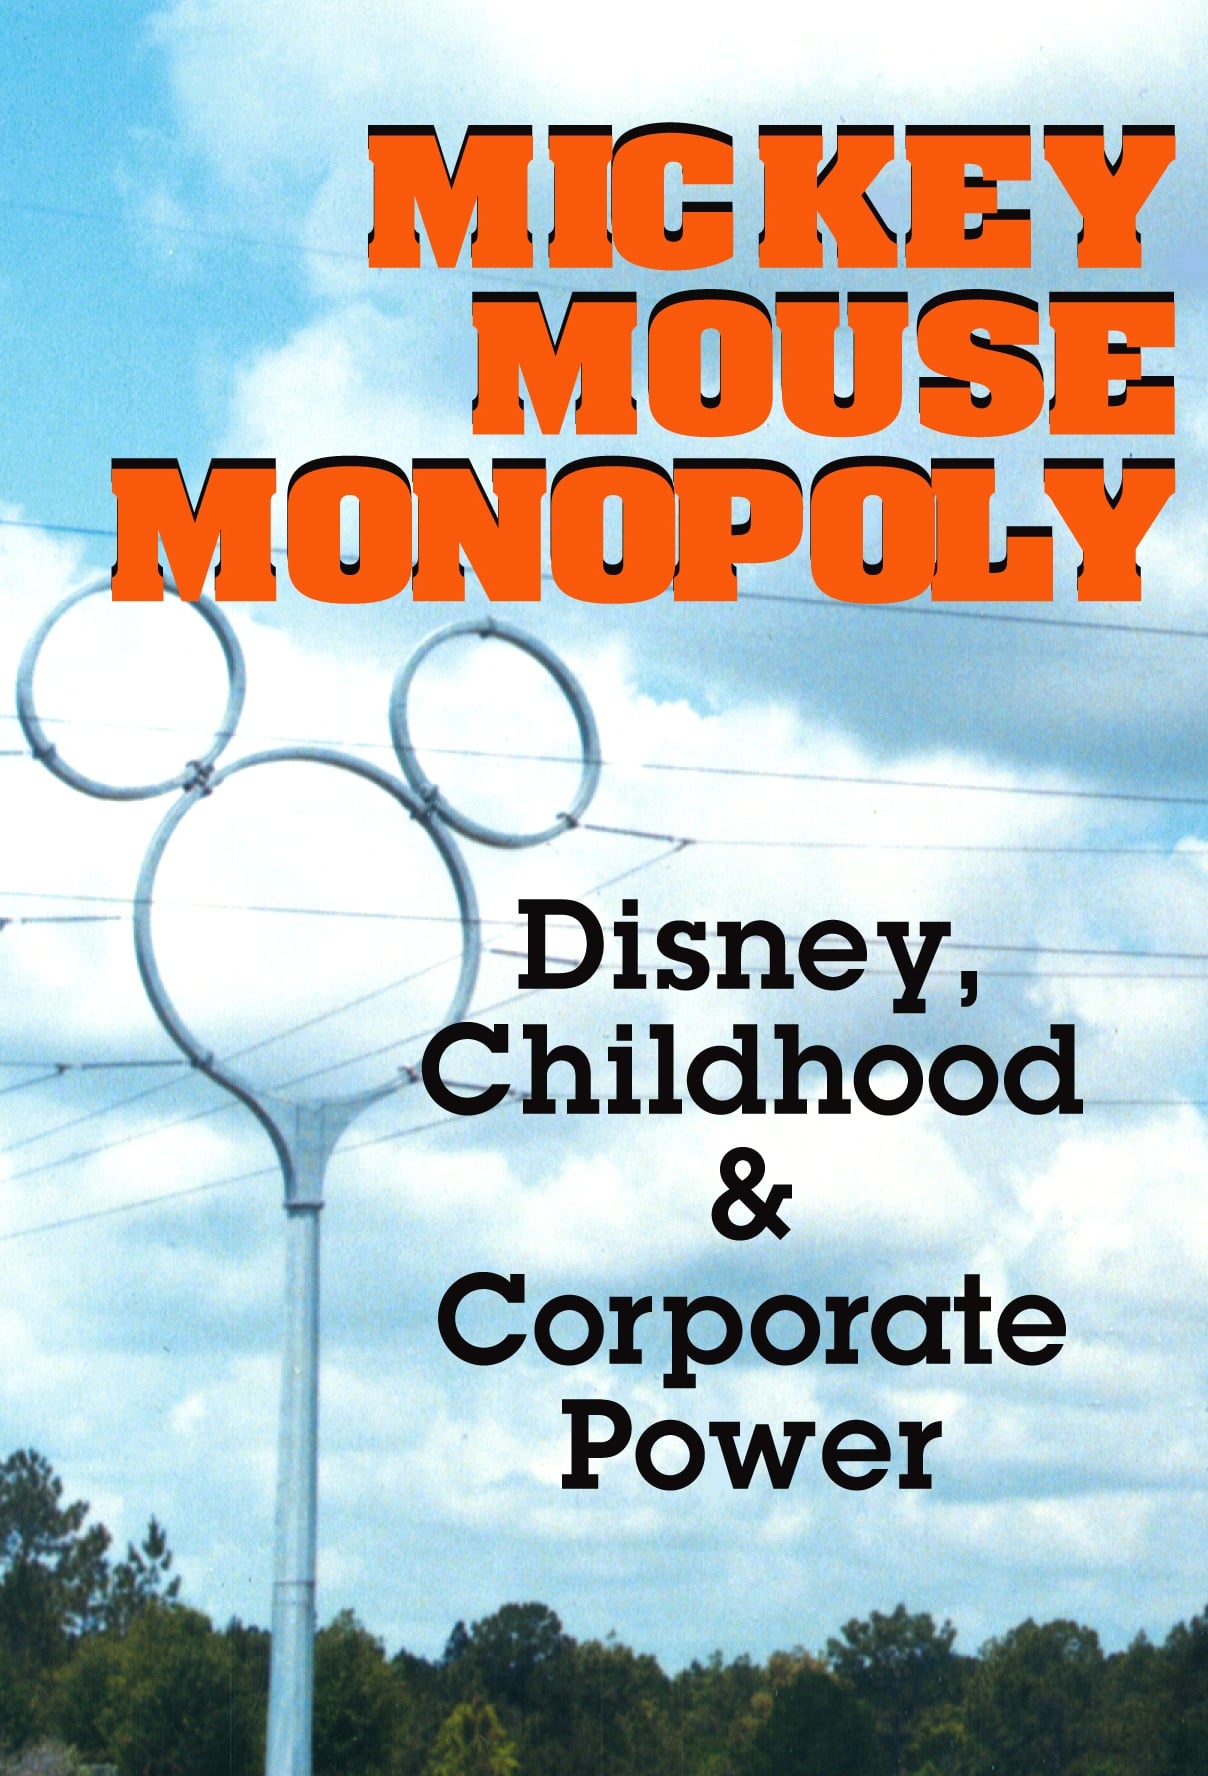 Mickey Mouse Monopoly: Disney, Childhood & Corporate Power